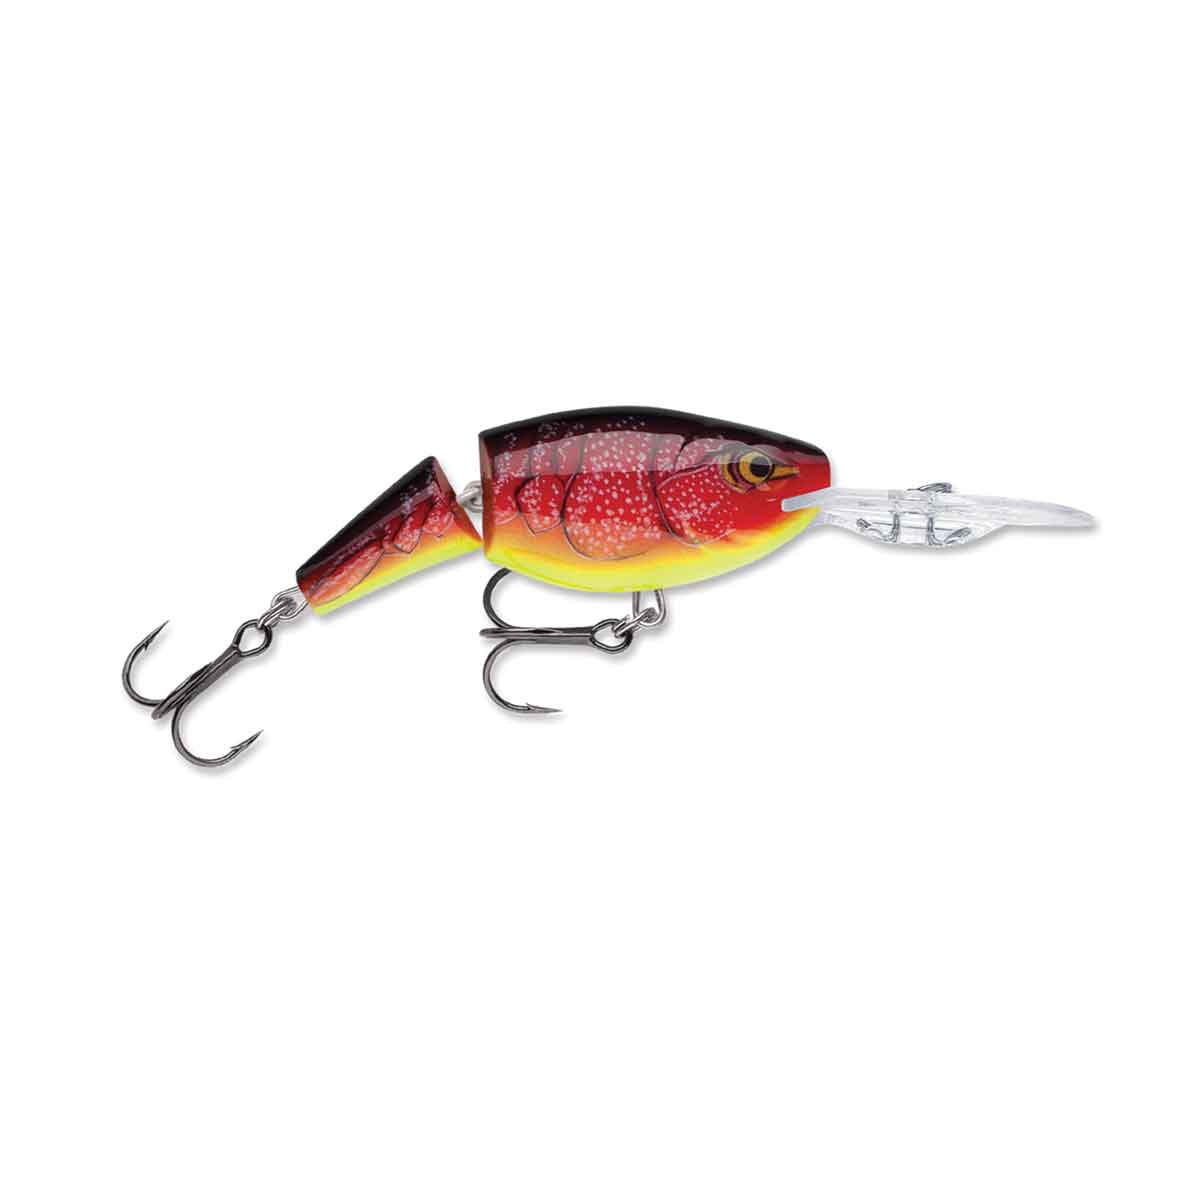 Jointed Shad Rap_Redfire Crawdad